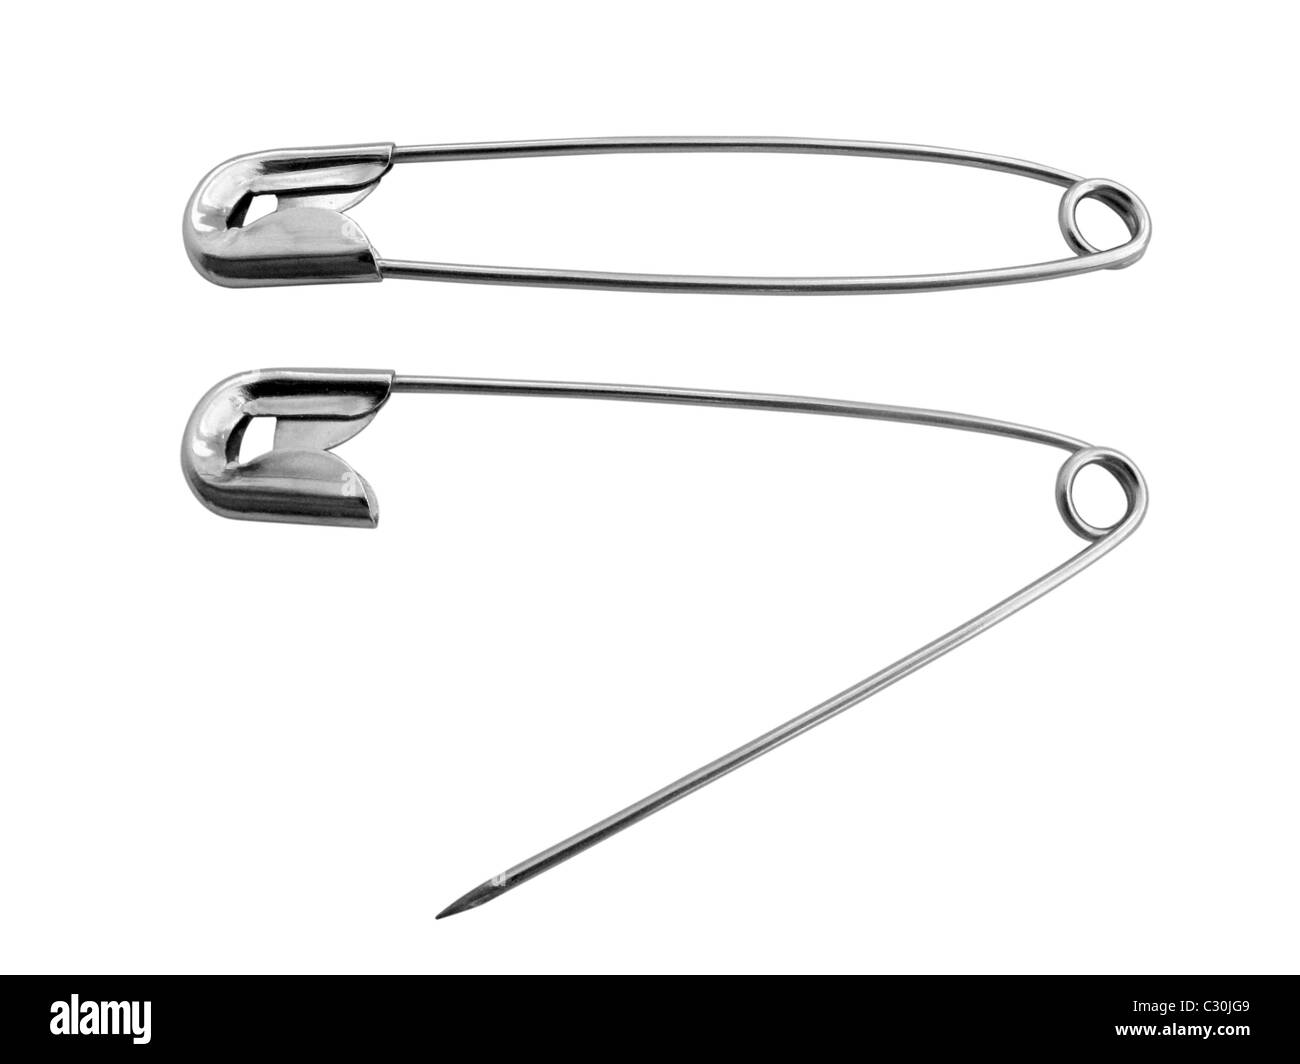 two safety pins isolated on white background Stock Photo